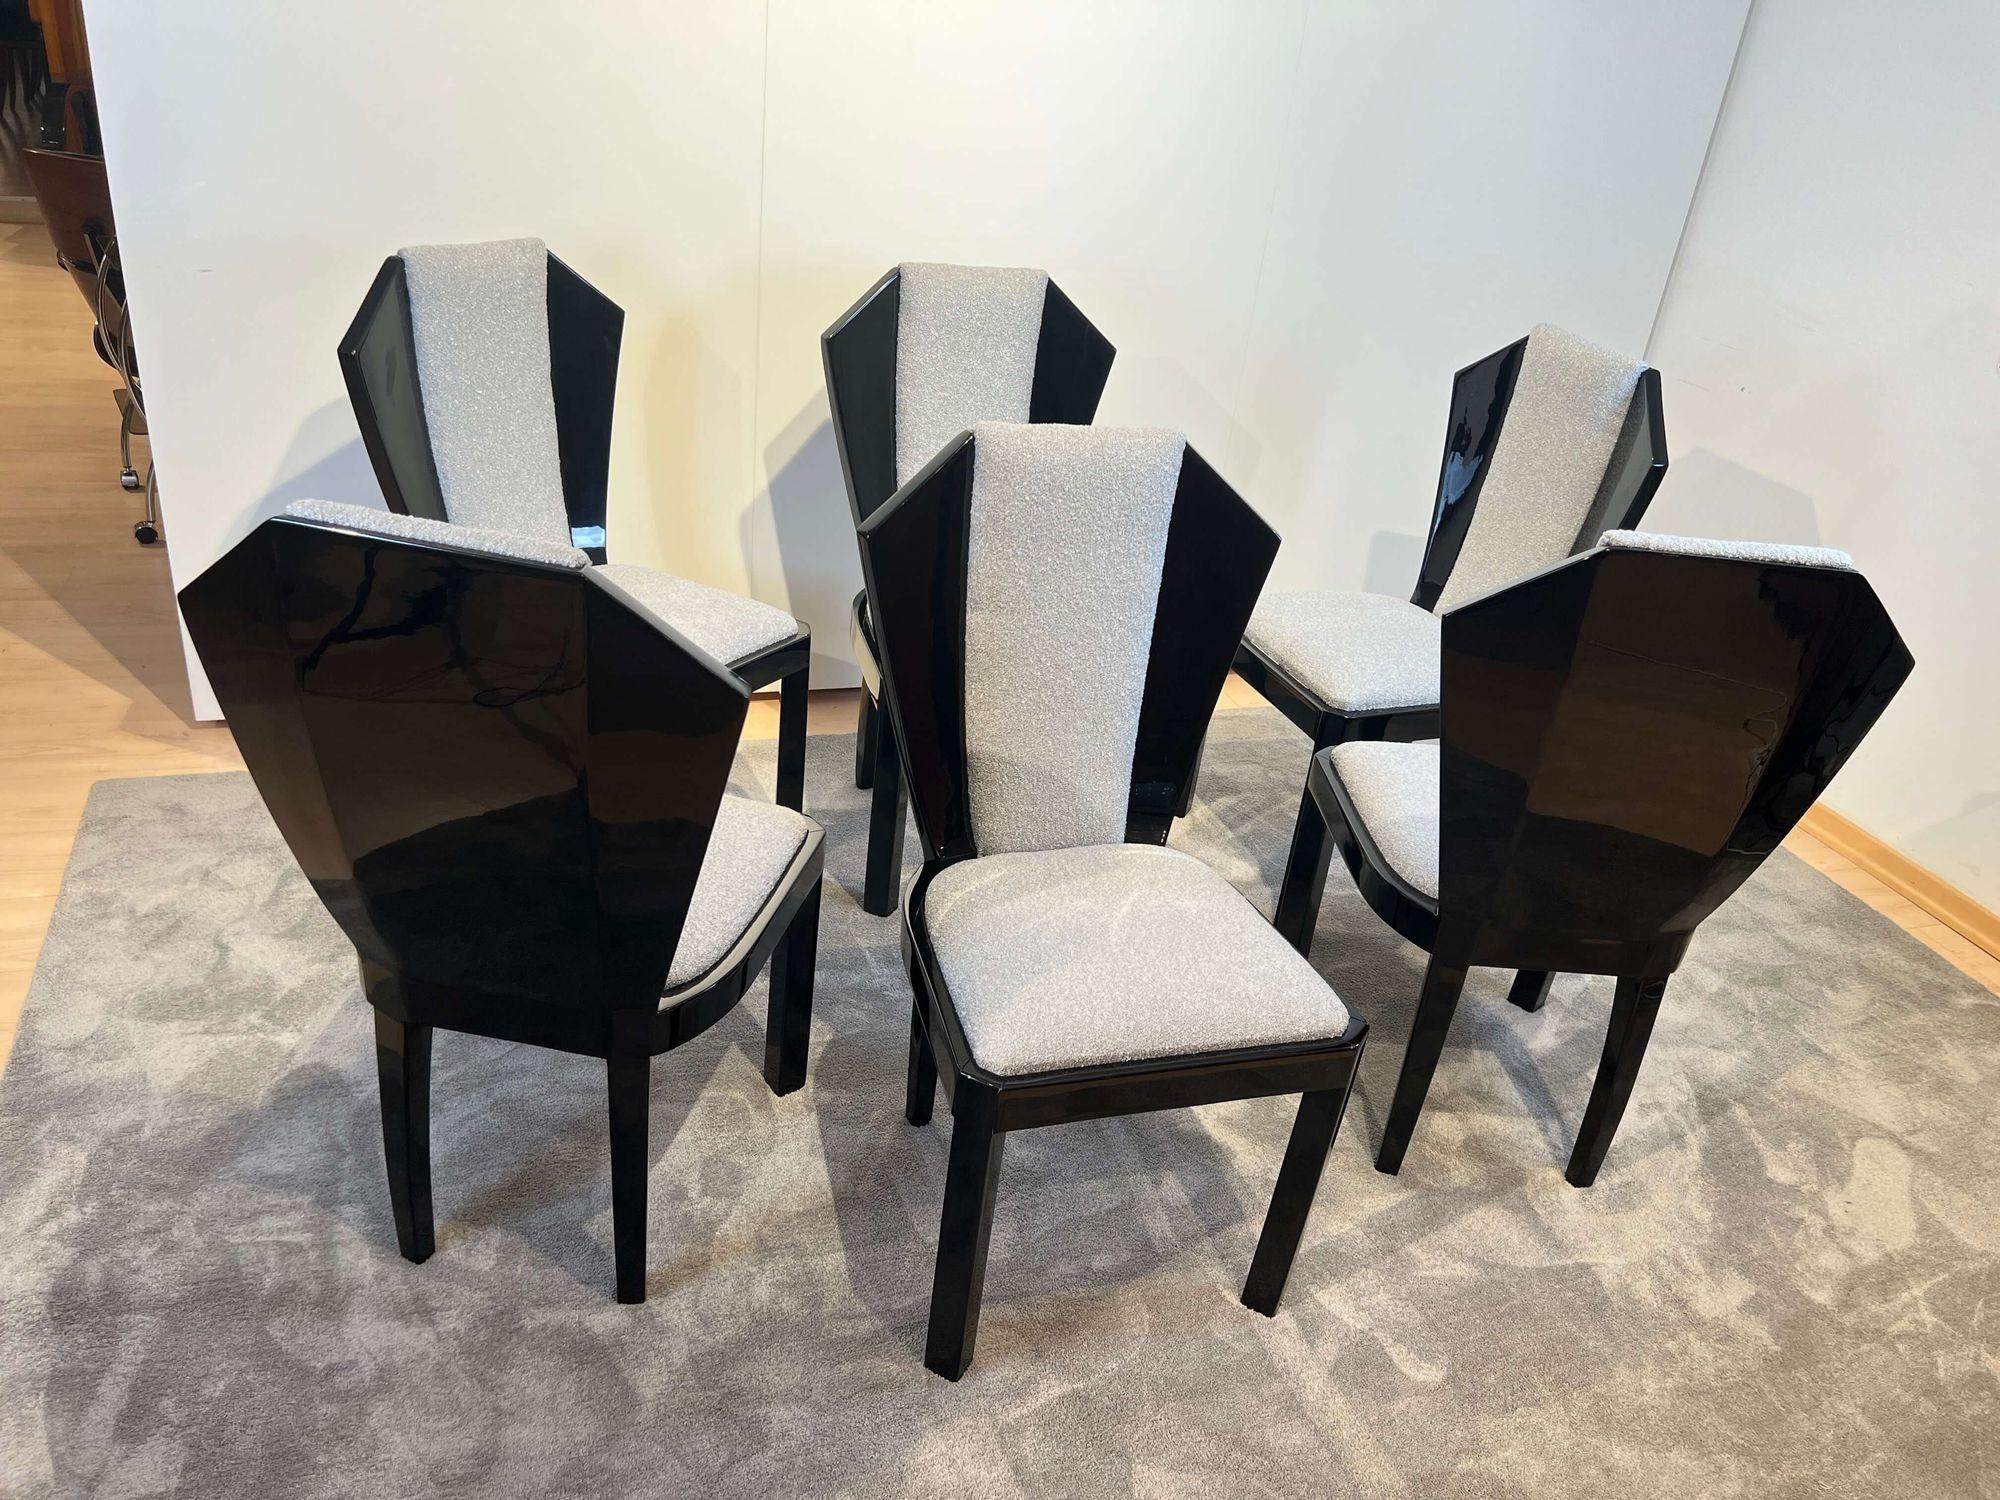 Mid-20th Century Set of Six Art Deco Dining Chairs, Black Lacquer, Grey Fabric, France circa 1930 For Sale